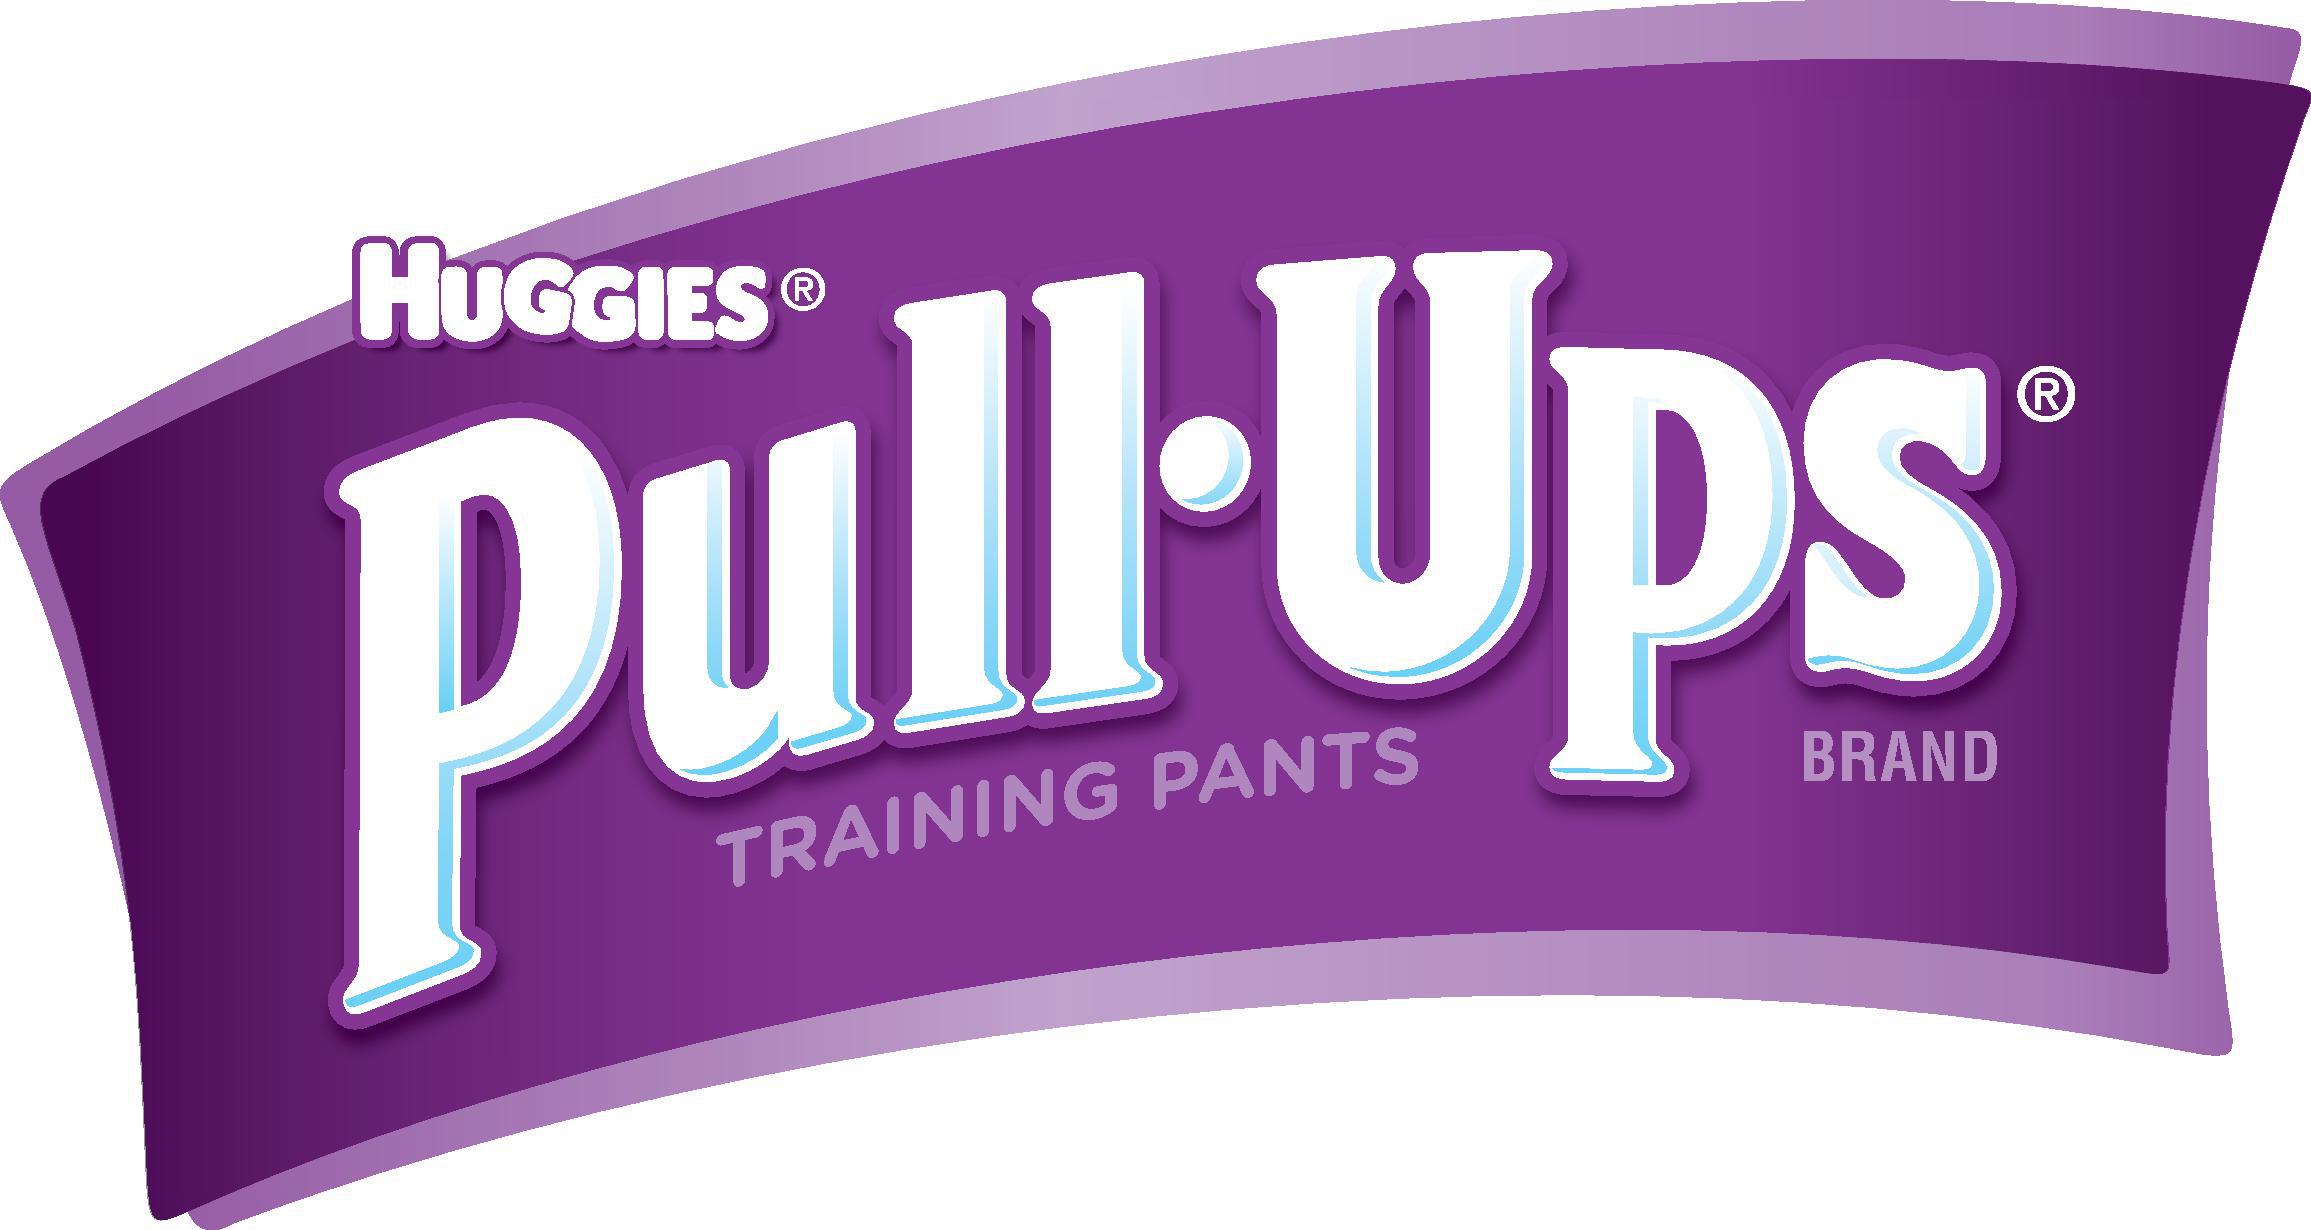 Get High-Value Pull-Ups Coupons & Check Out These Potty Training Tips!